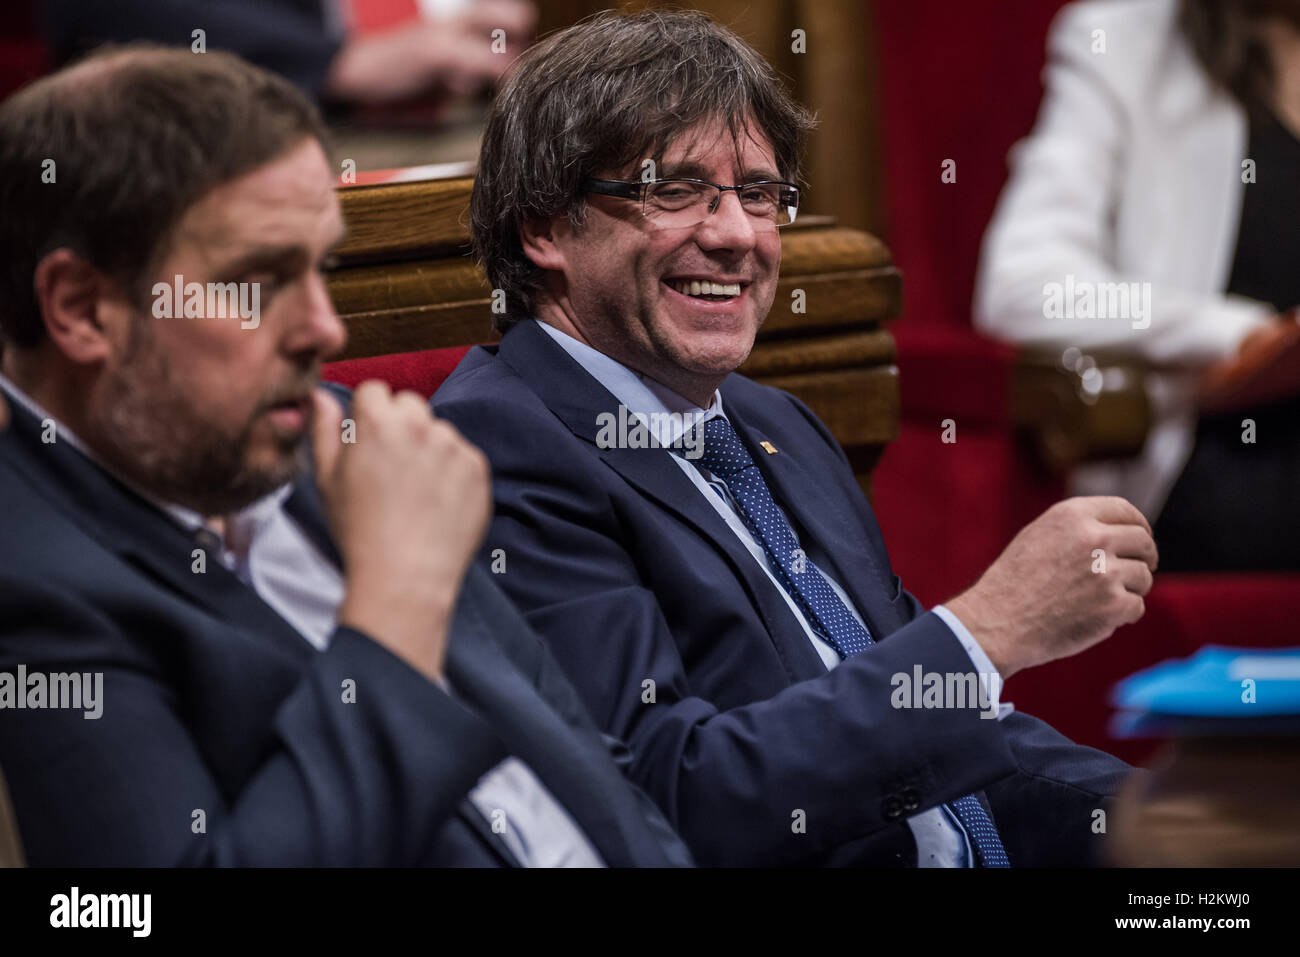 September 29, 2016 - Barcelona, Catalonia, Spain - ORIOL JUNQUERAS, Vice-President of the Catalan Government, and CARLES PUIGDEMONT, President of the Catalan Government, during the plenary session for a motion of confidence at the Catalan parliament (Credit Image: © Matthias Oesterle via ZUMA Wire) Stock Photo